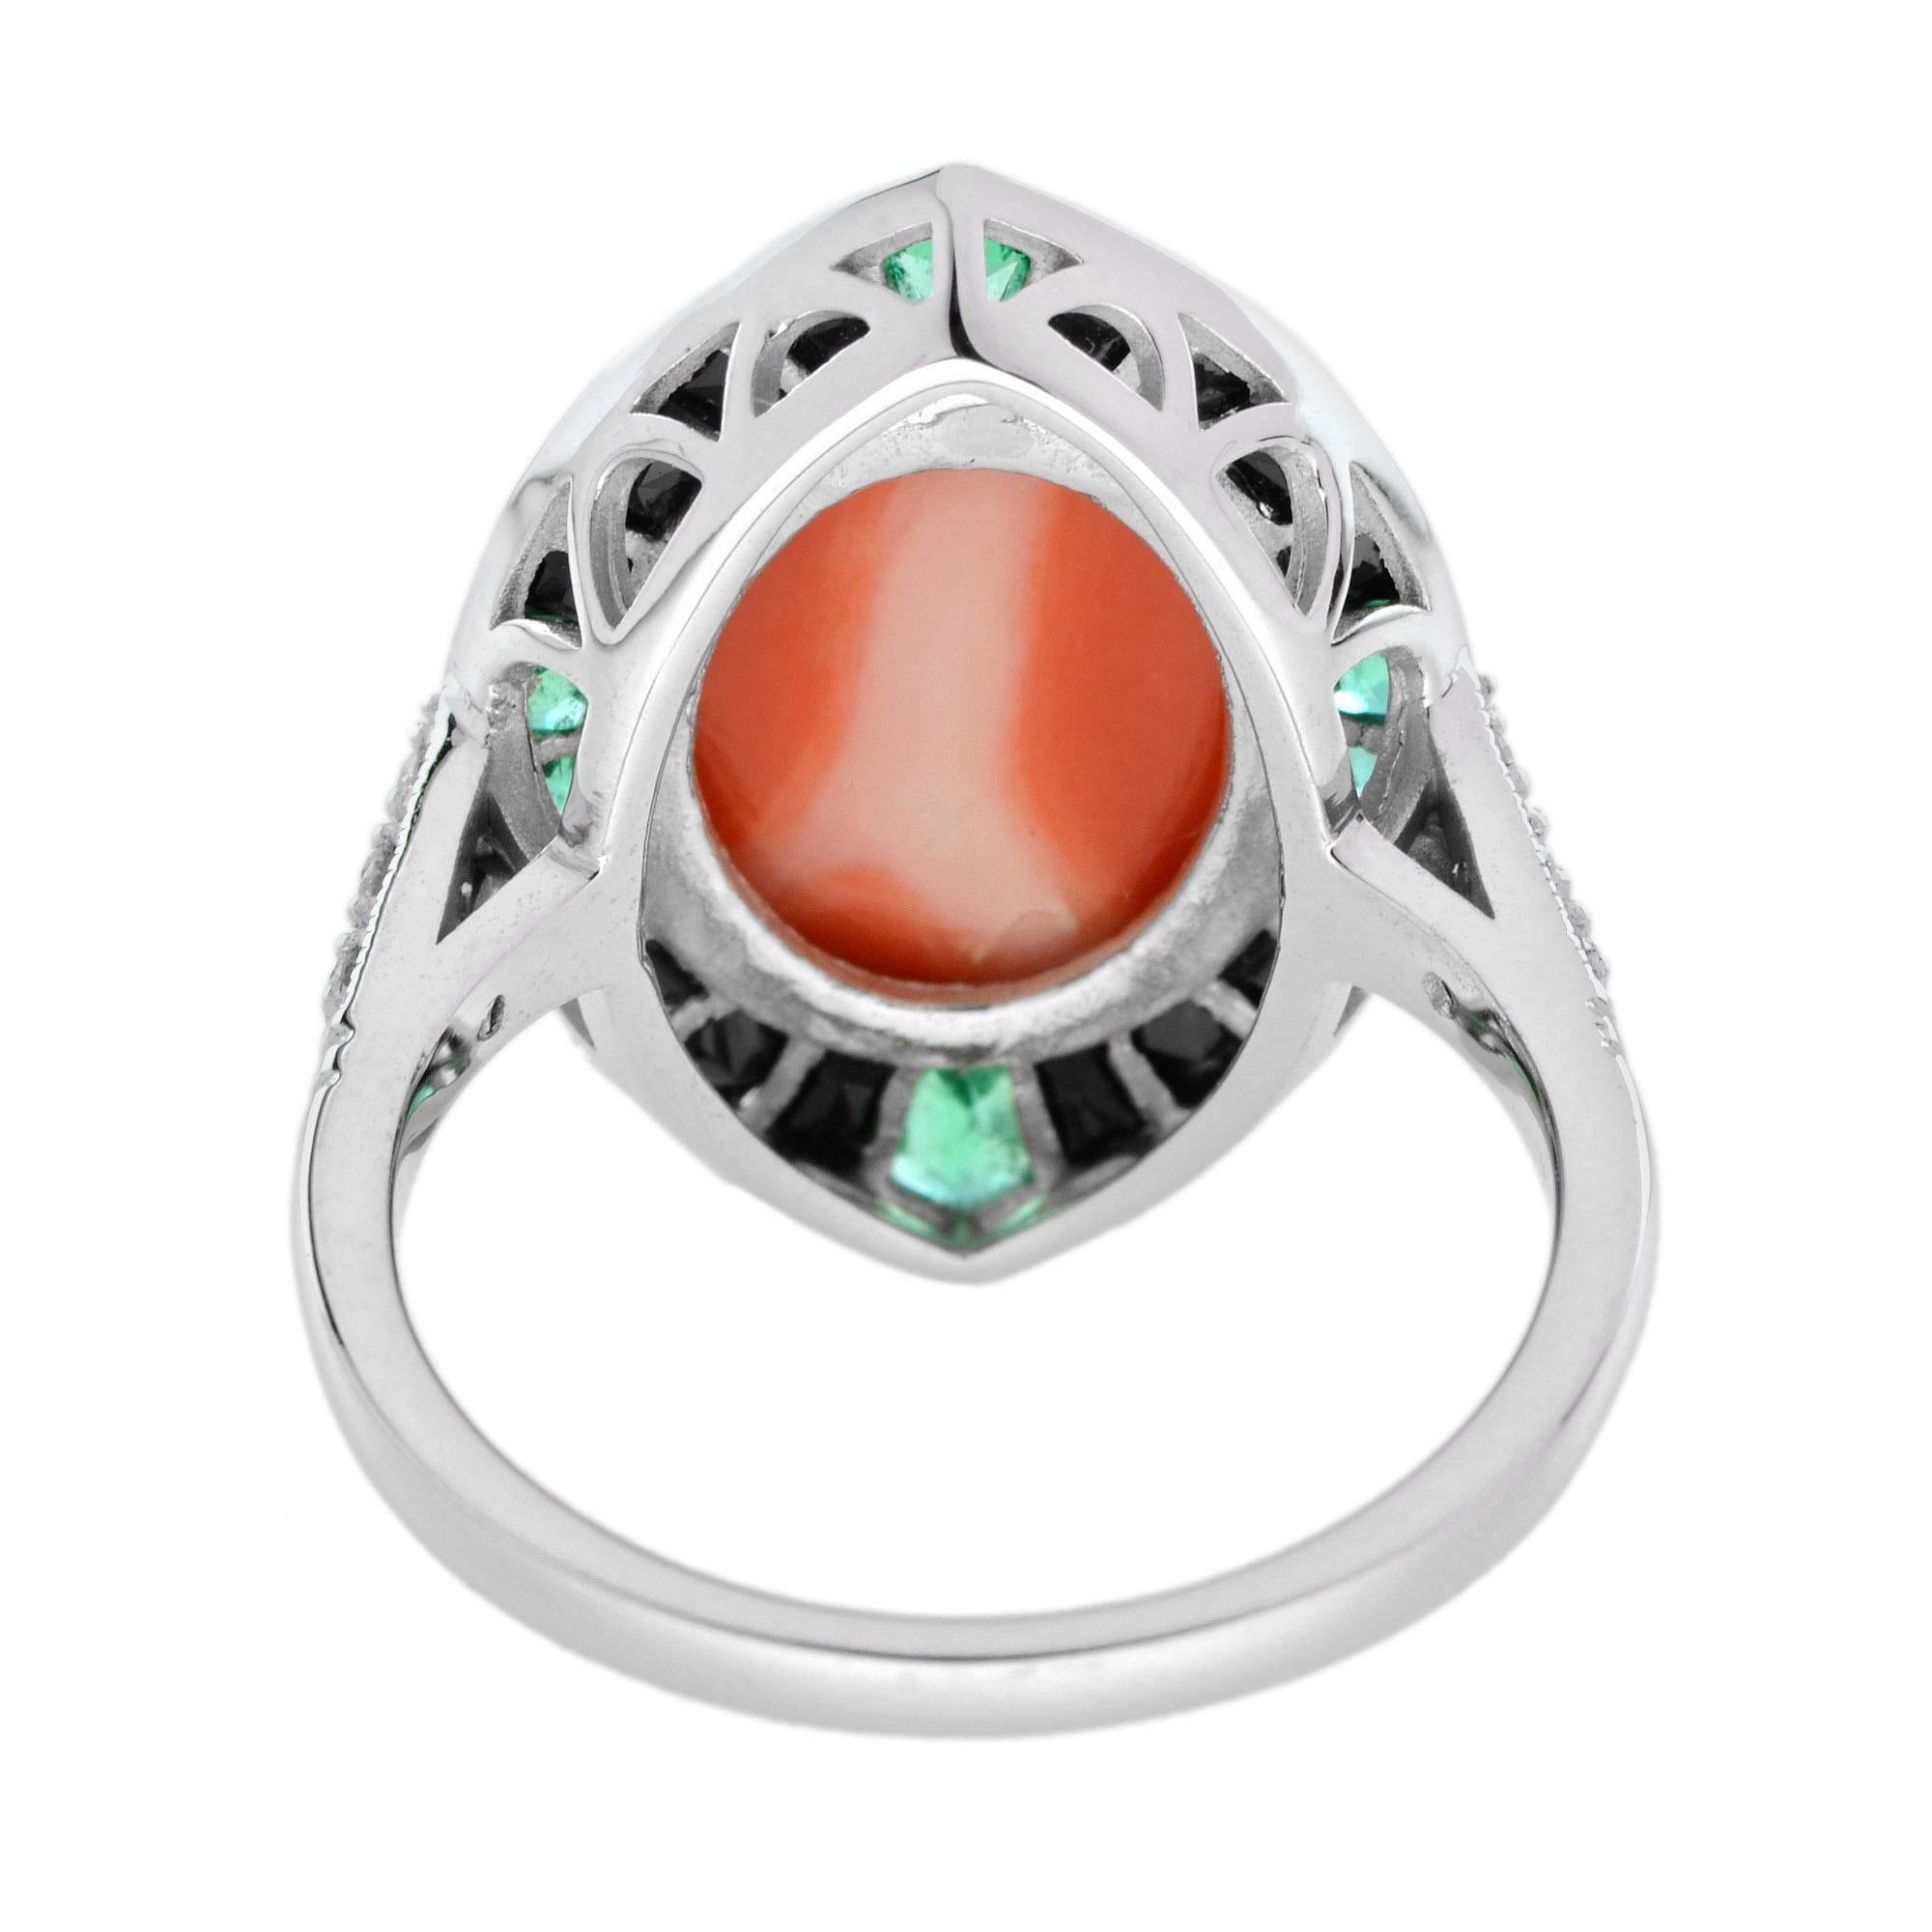 4.05 Ct. Coral Diamond Emerald Onyx Art Deco Style Cocktail Ring in White Gold 2